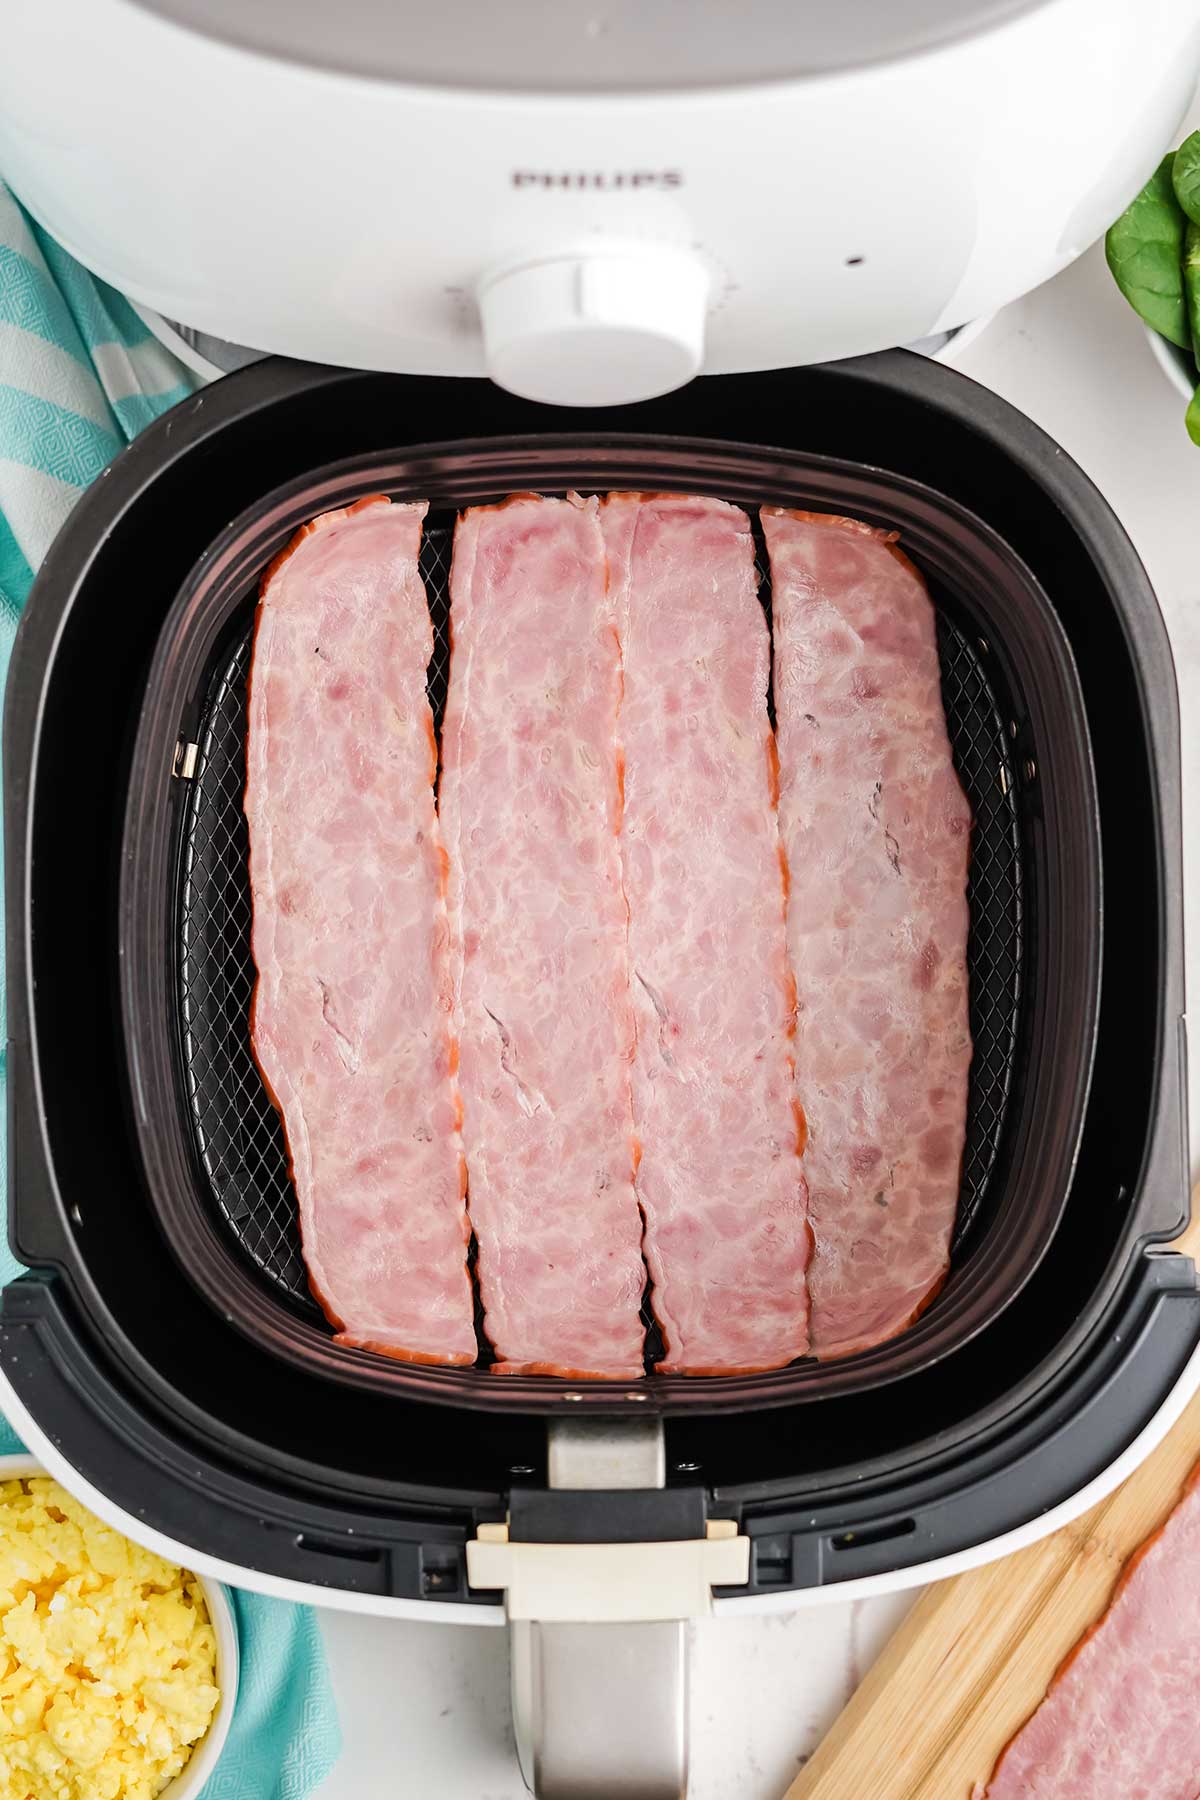 Adding the turkey bacon to the air fryer to cook.